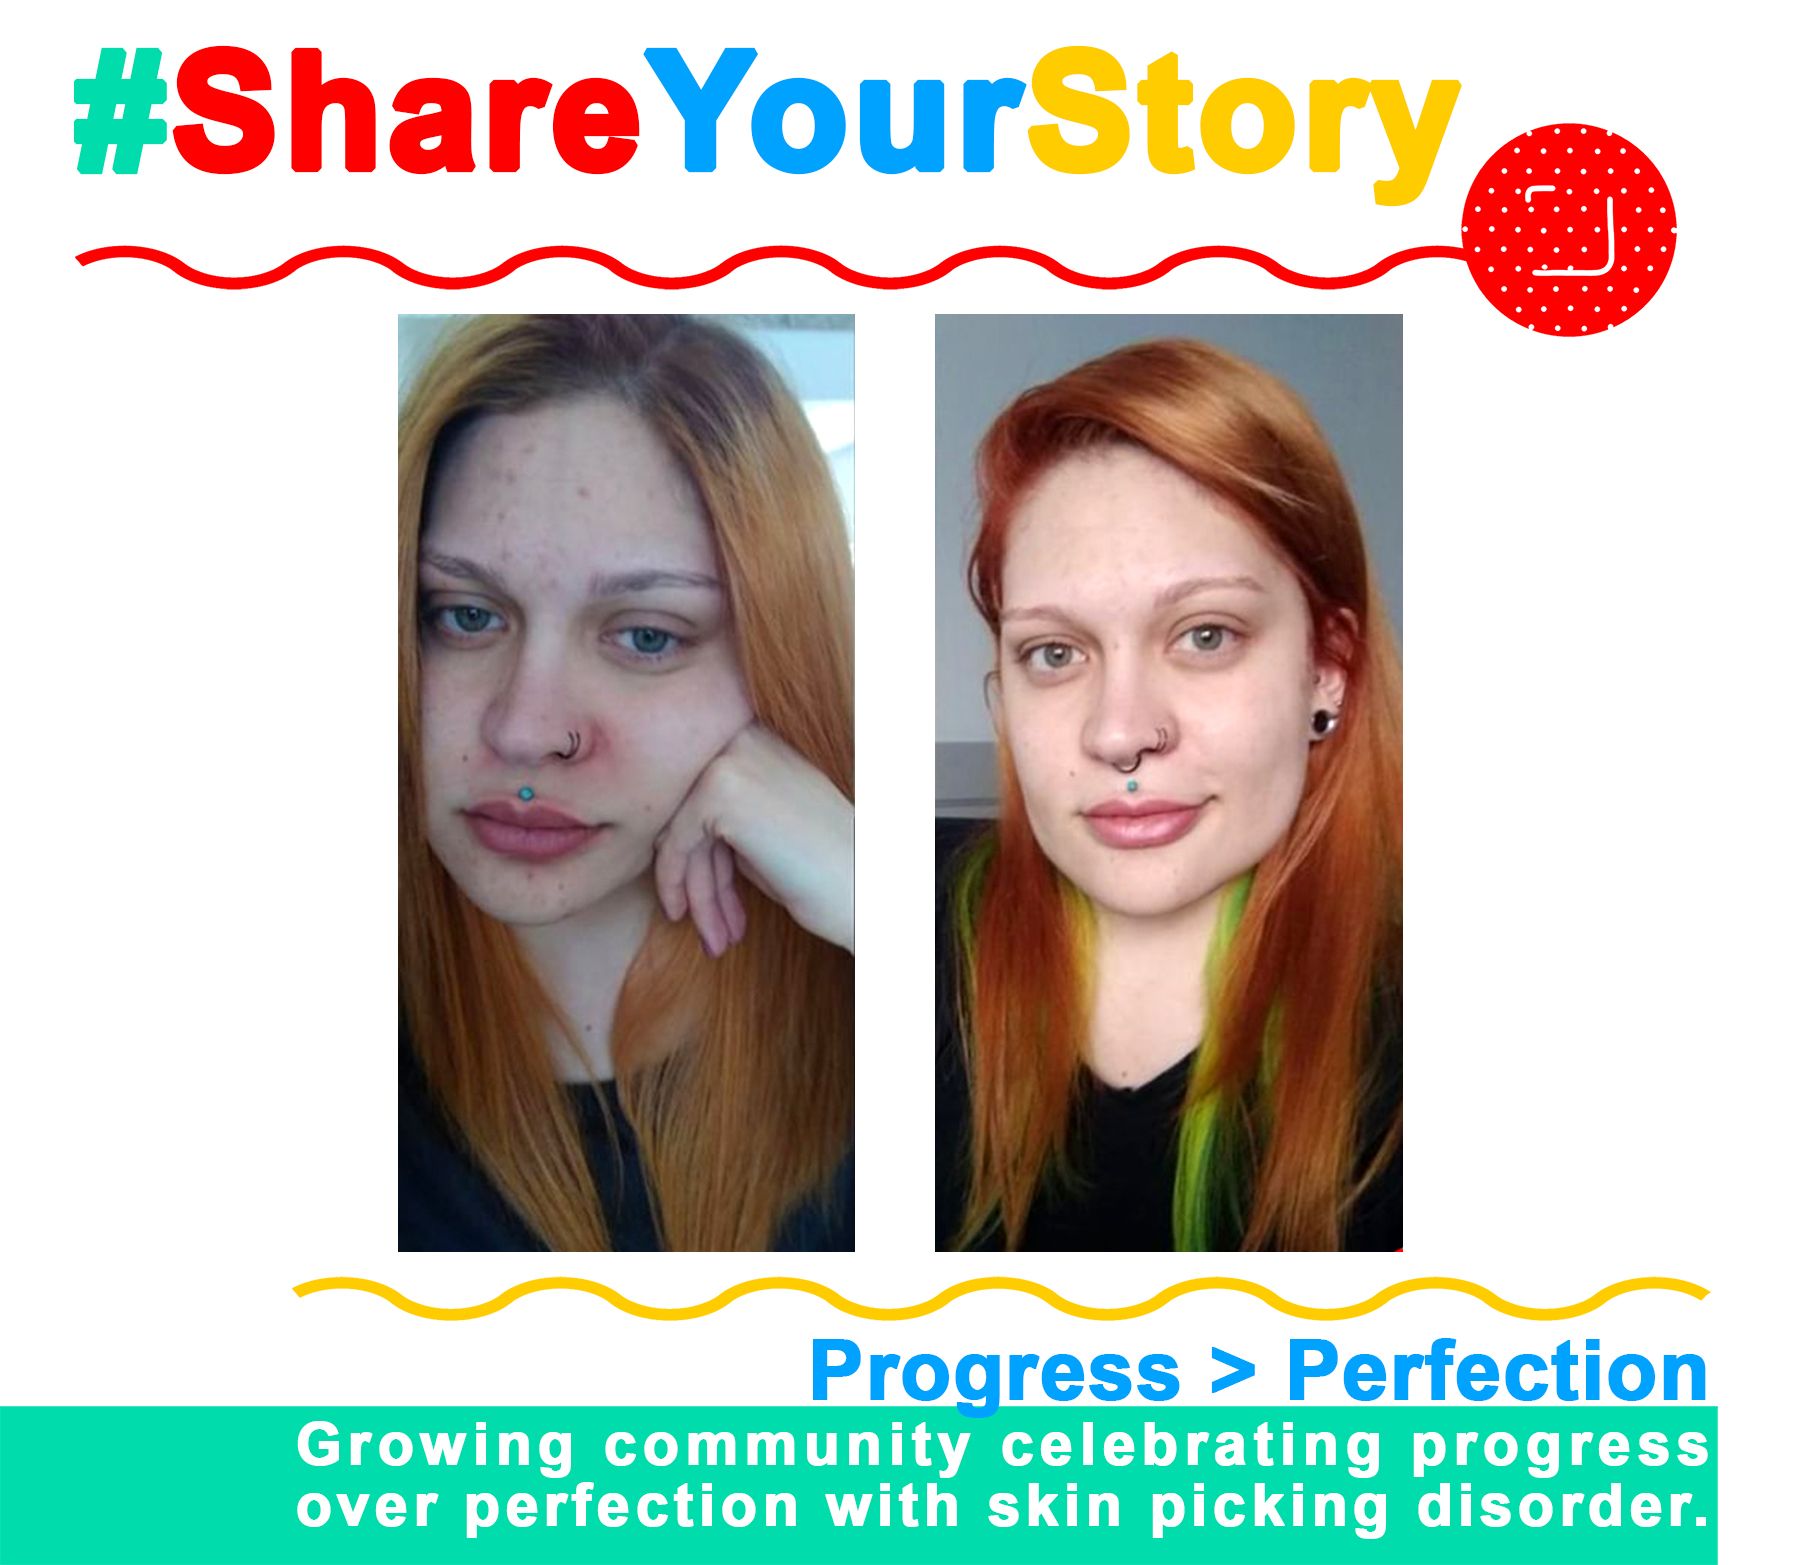 #ShareYourStory: Camille